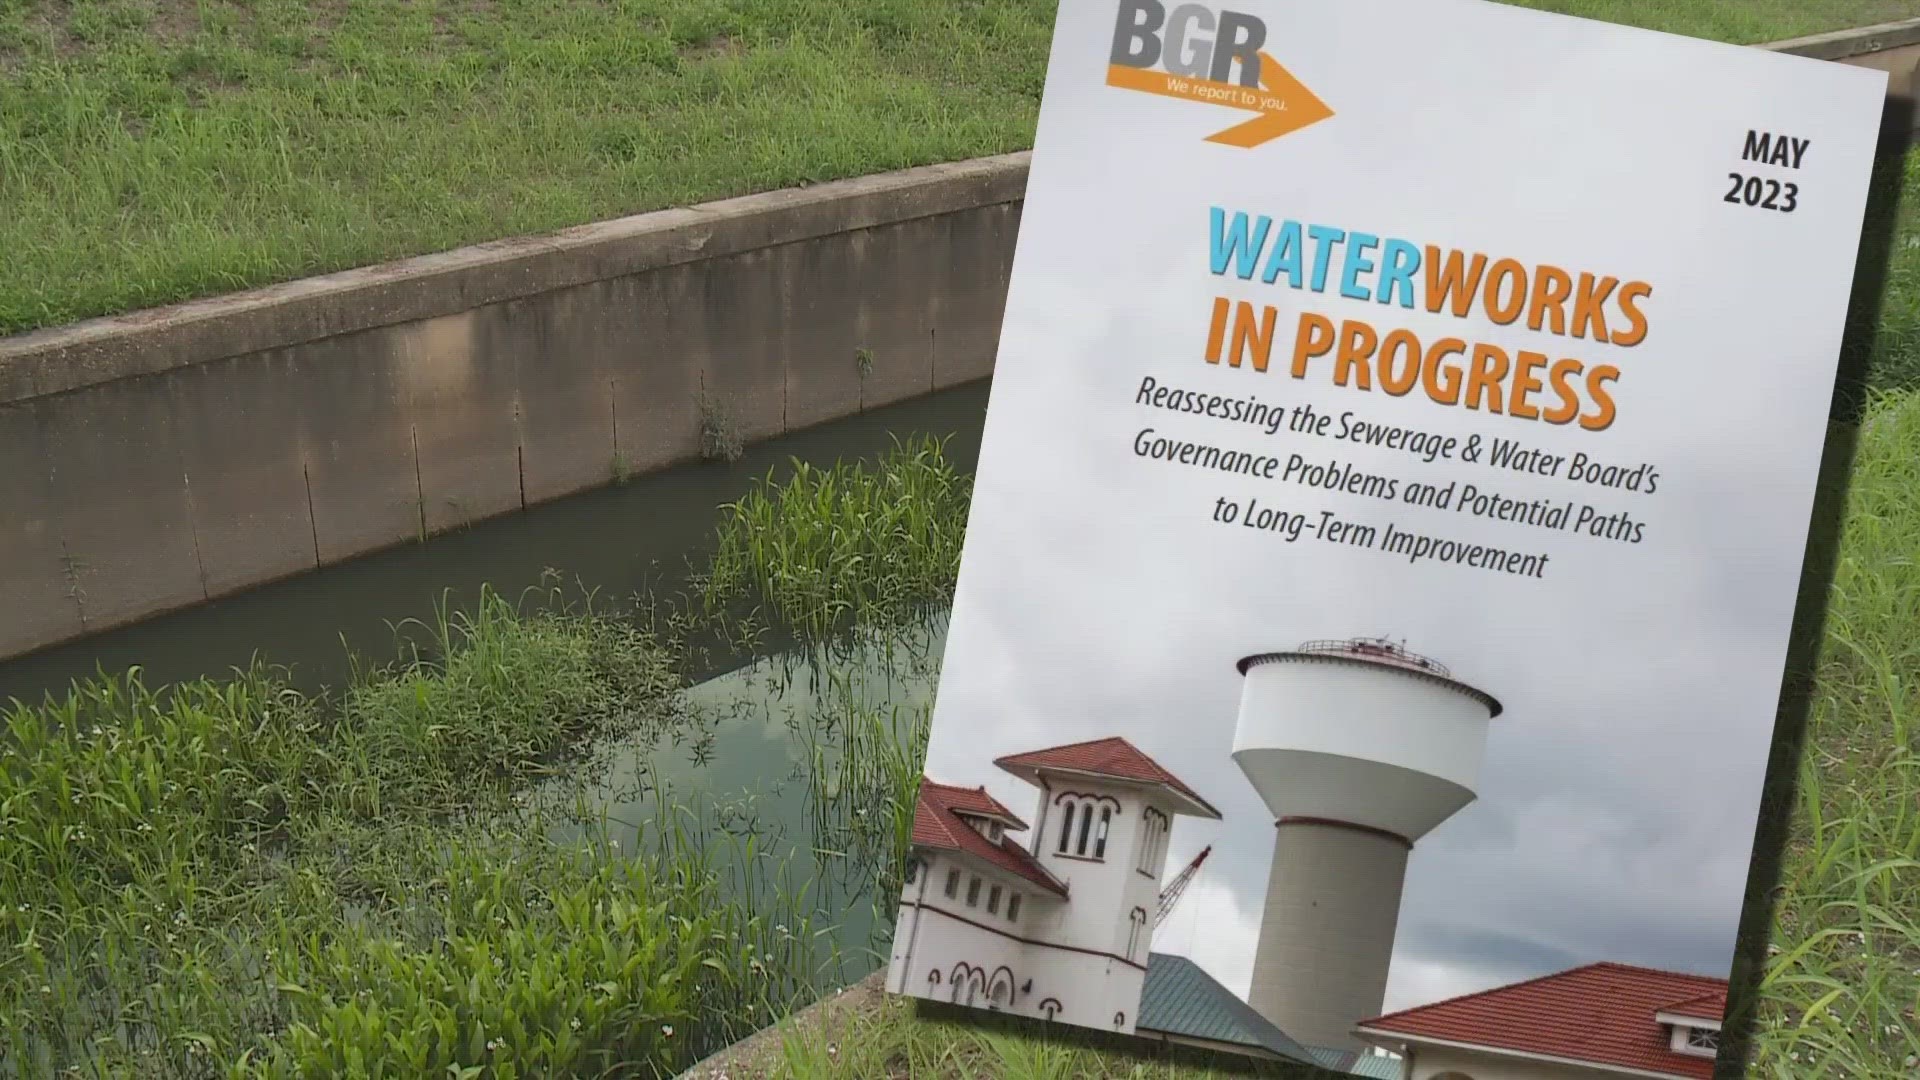 BGR said that SWBNO has major issues in its governance structure that are directly affecting problems with the city's water, sewer and drainage systems.